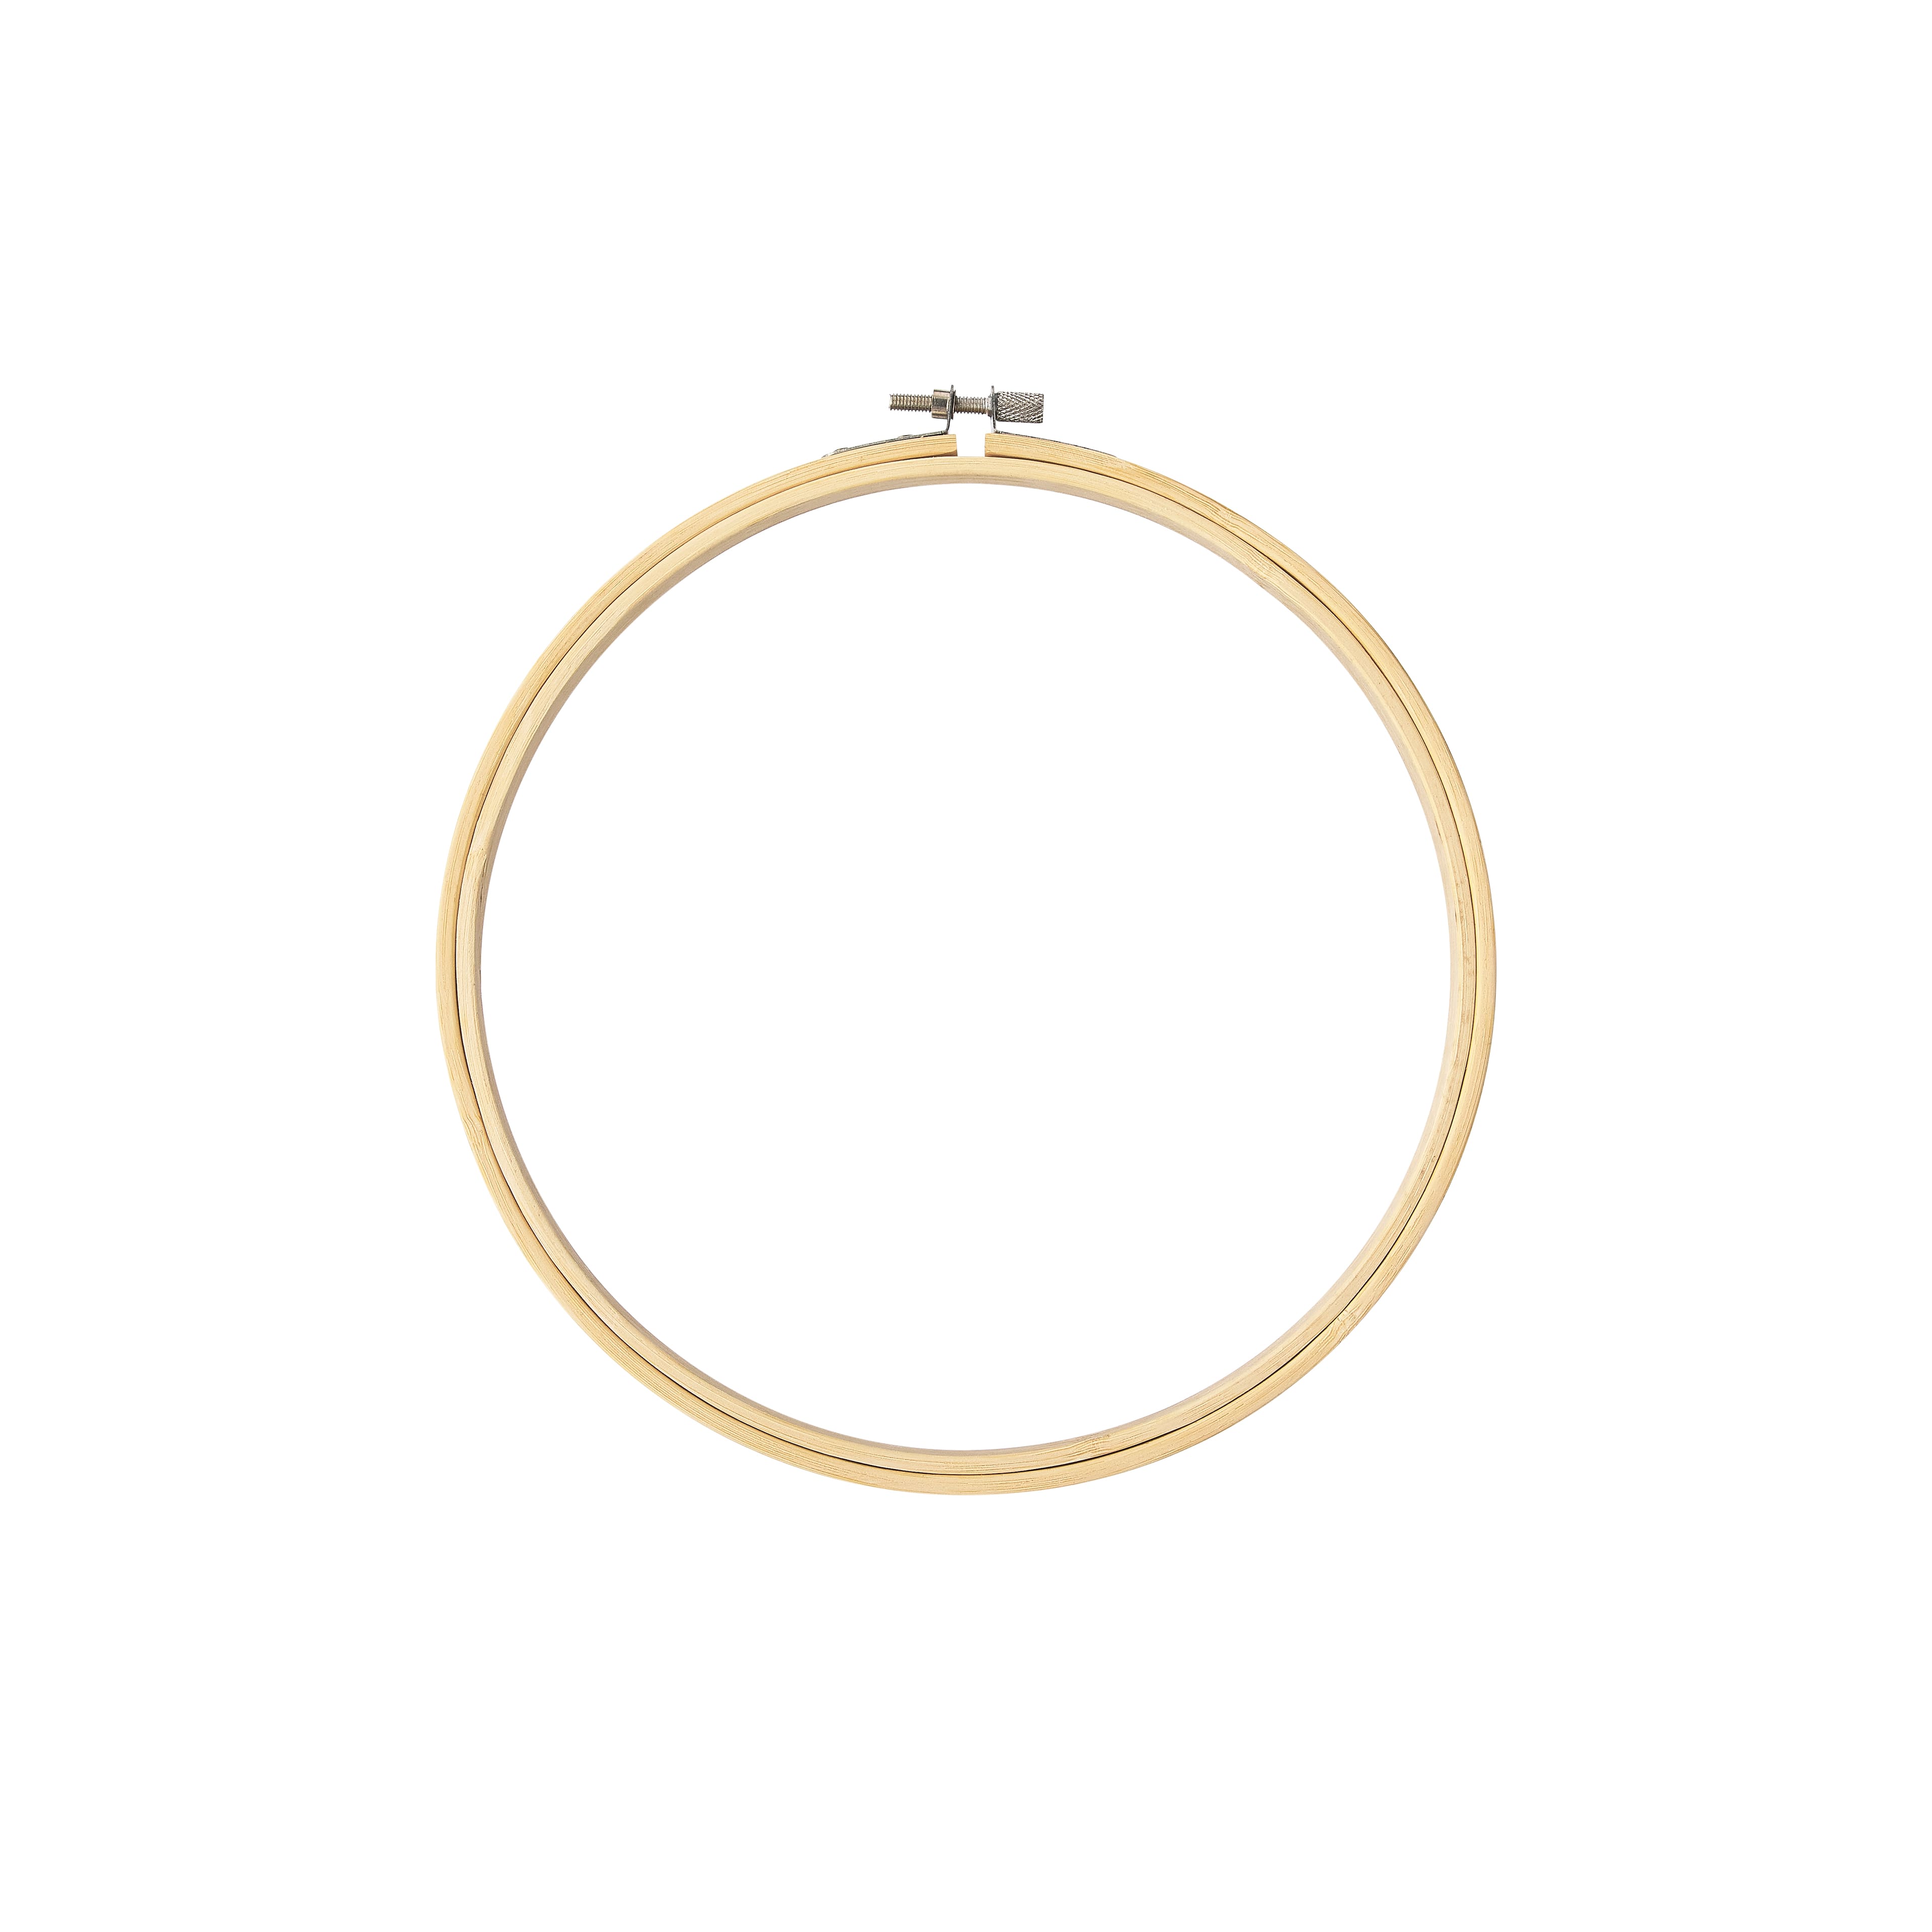  Essentials by Leisure Arts Wood Embroidery Hoop 14 Bamboo - Wooden  Hoops for Crafts - Embroidery Hoop Holder - Cross Stitch Hoop - Cross  Stitch Hoops and Frames